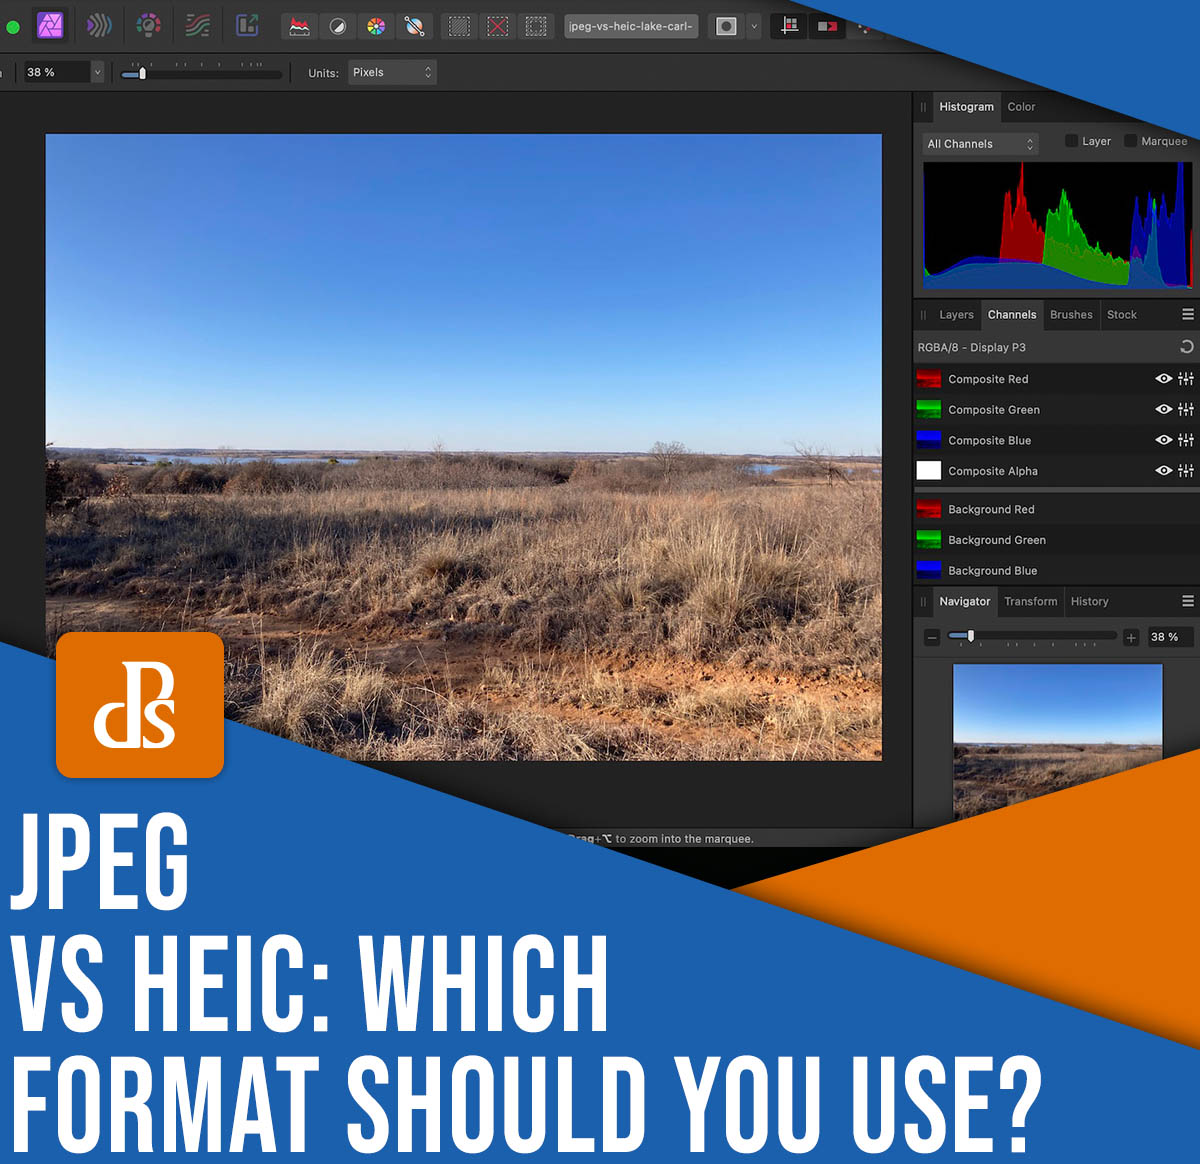 JPEG vs HEIC: Which format should you use?